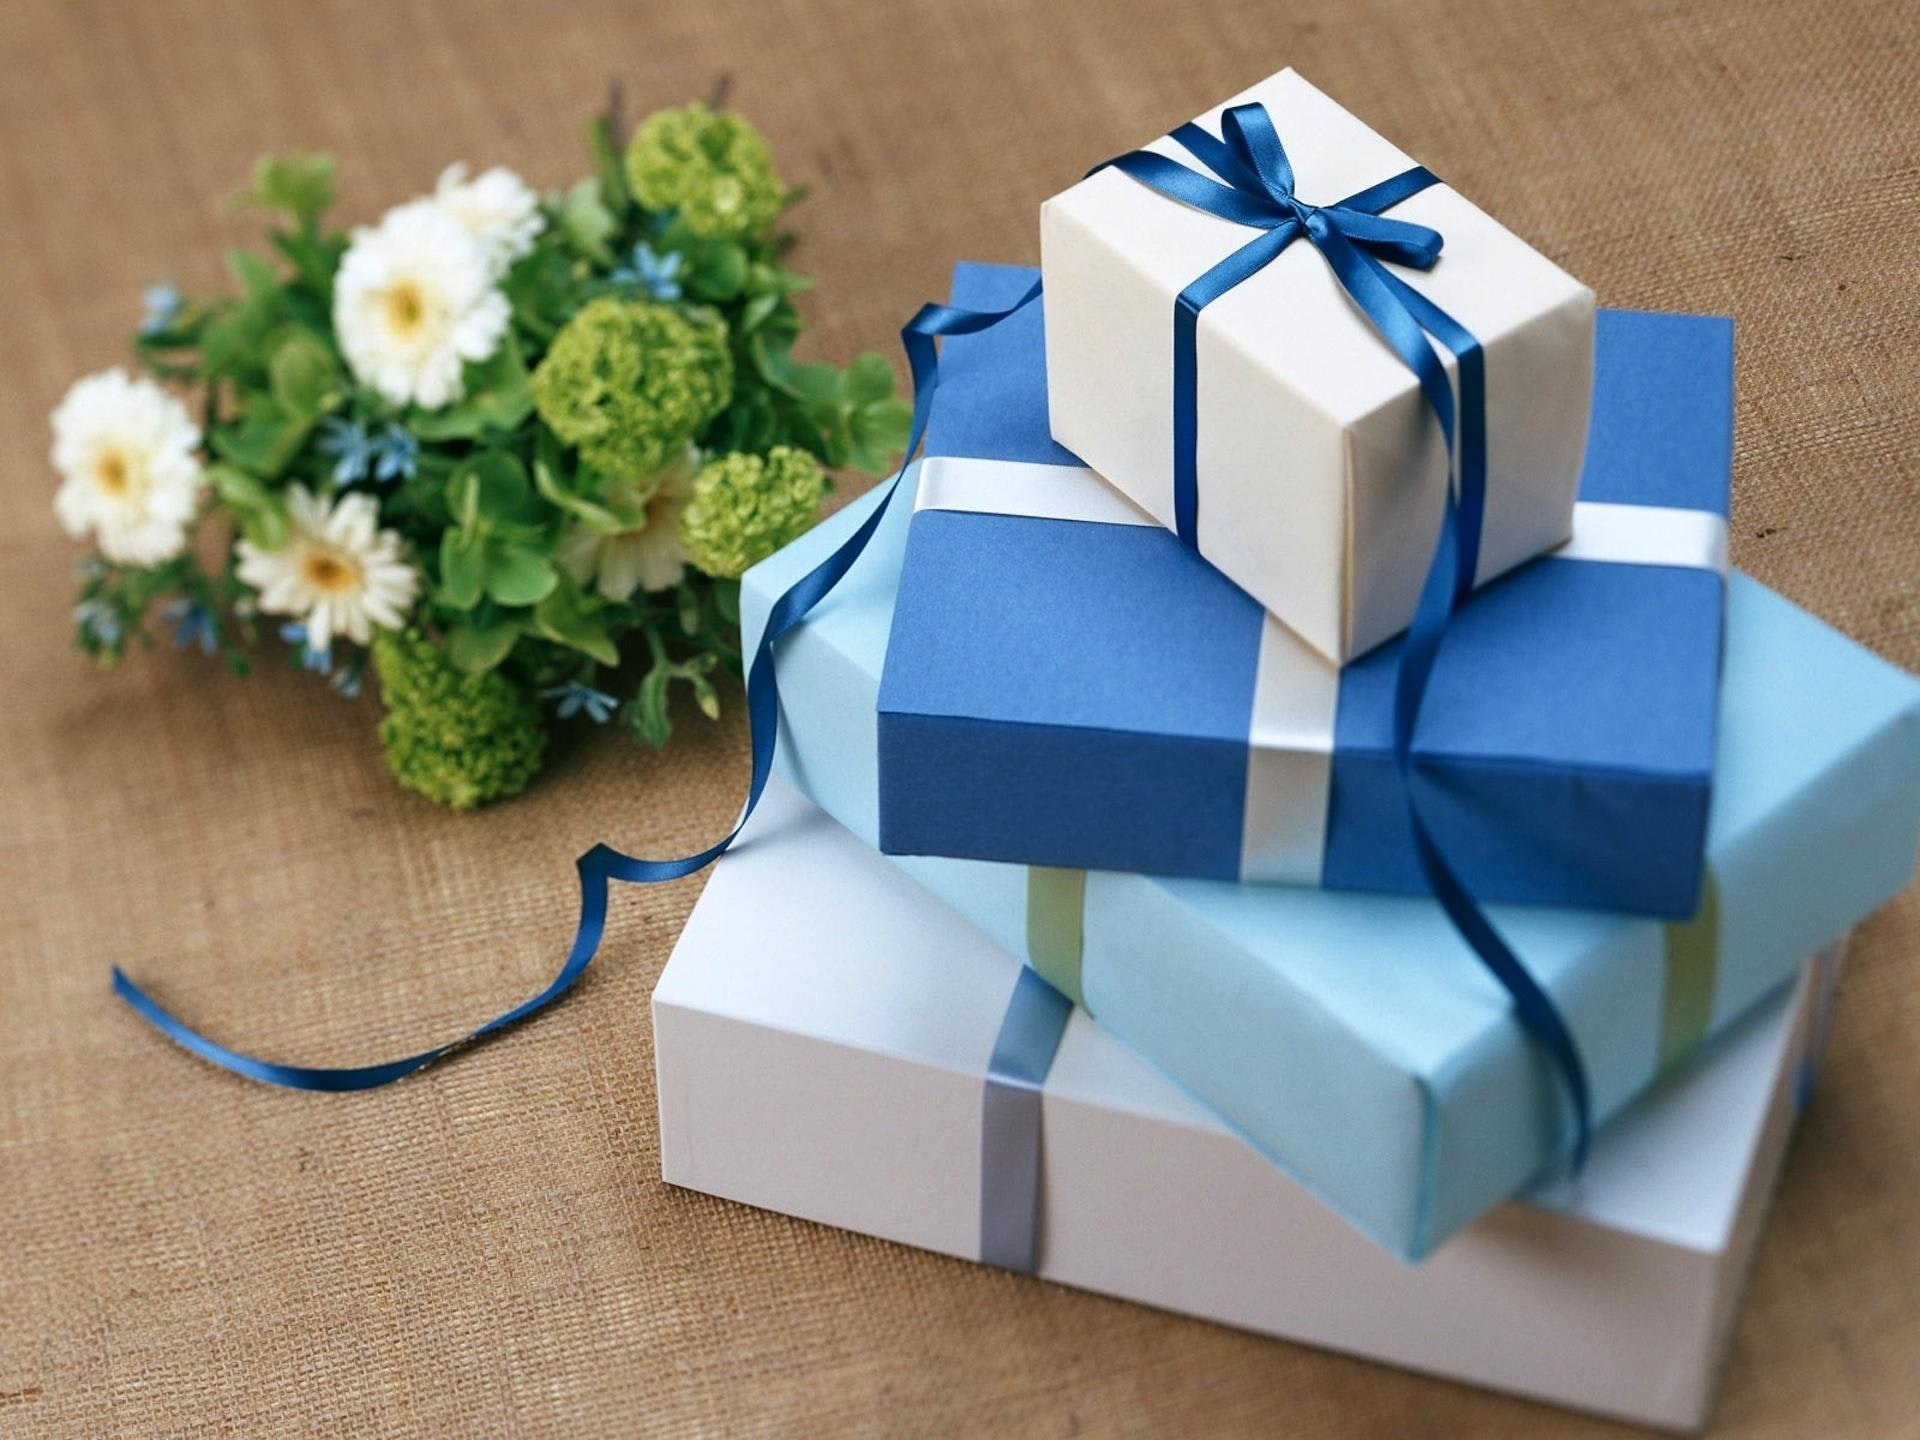 ONE Blog: Gift Giving Guide for Network Engineers